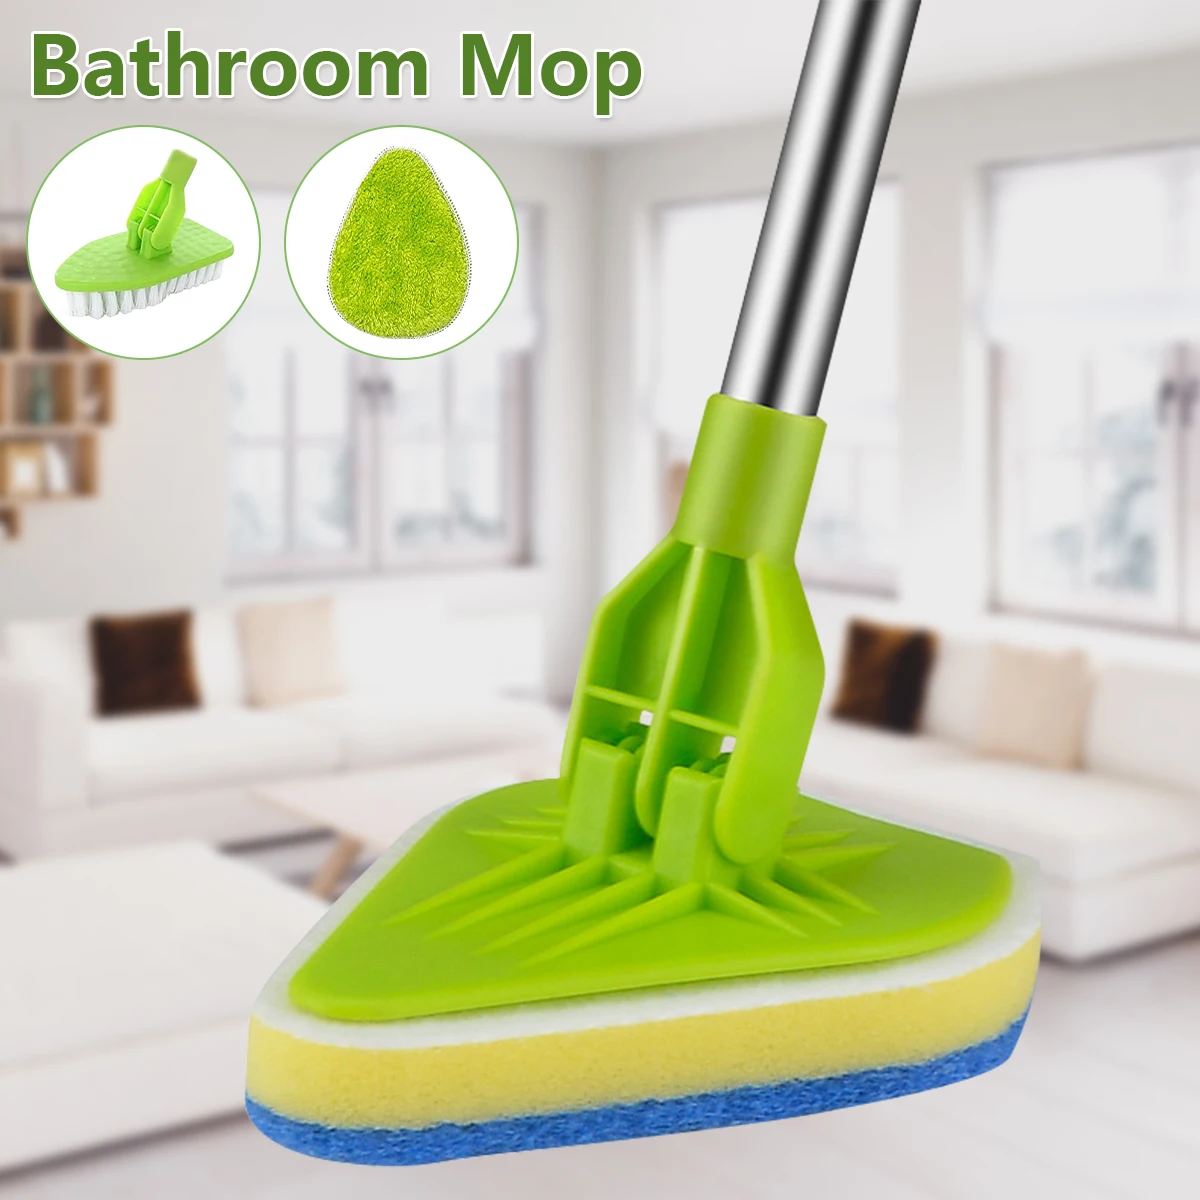 https://ae01.alicdn.com/kf/S9c809aac05ce4894ad3063ded607eff3T/Scrub-Cleaning-Brush-with-Long-Handle-3-in-1-Shower-Tub-Tile-Scrubber-Brush-Extendable-Multifunctional.jpg